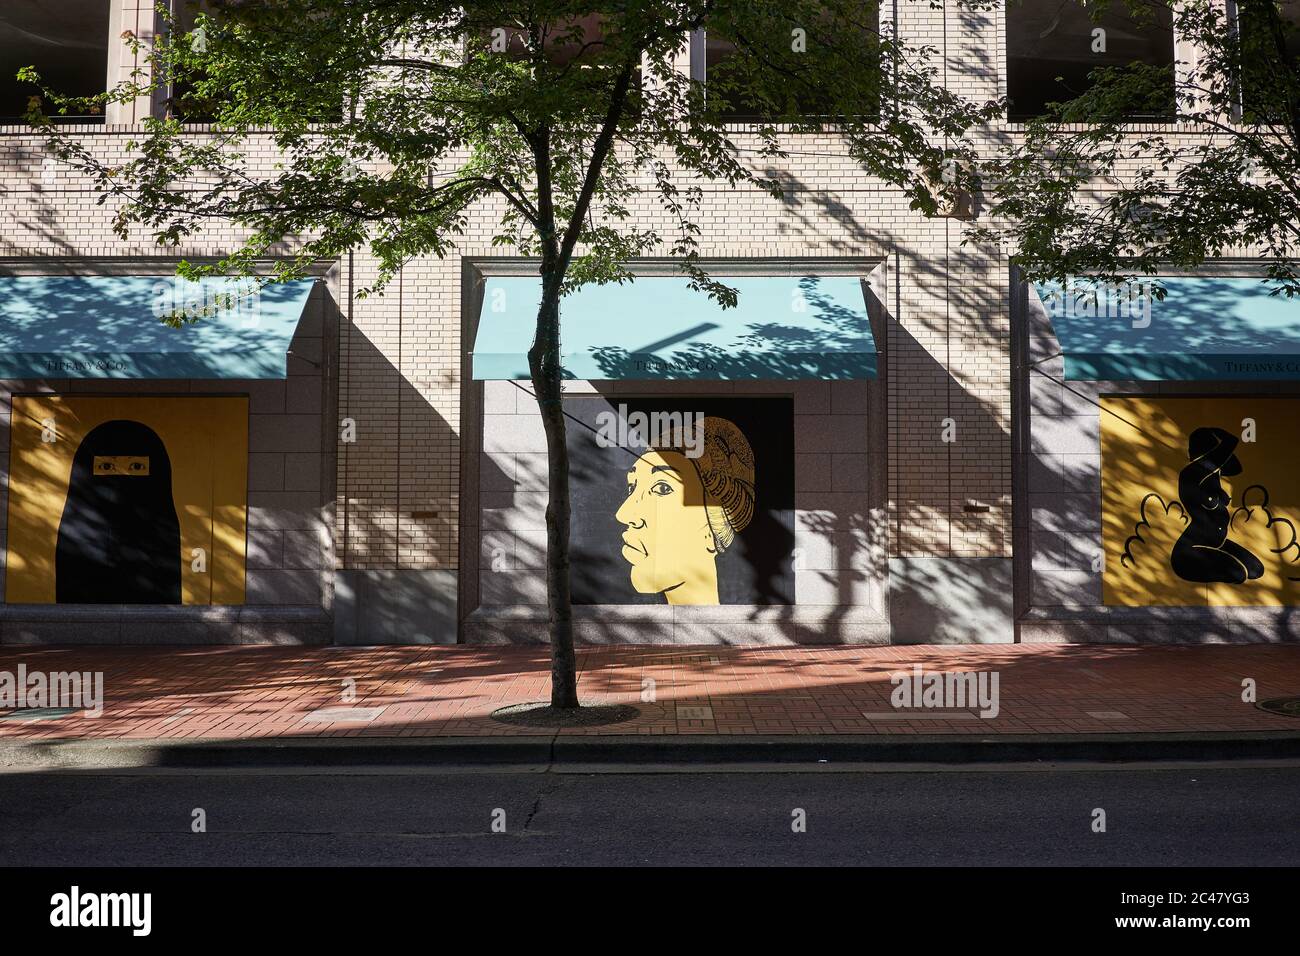 The closed and boarded up Tiffany & Co store in downtown Portland, Oregon, has become unofficial canvases for street artists to make peaceful protests. Stock Photo